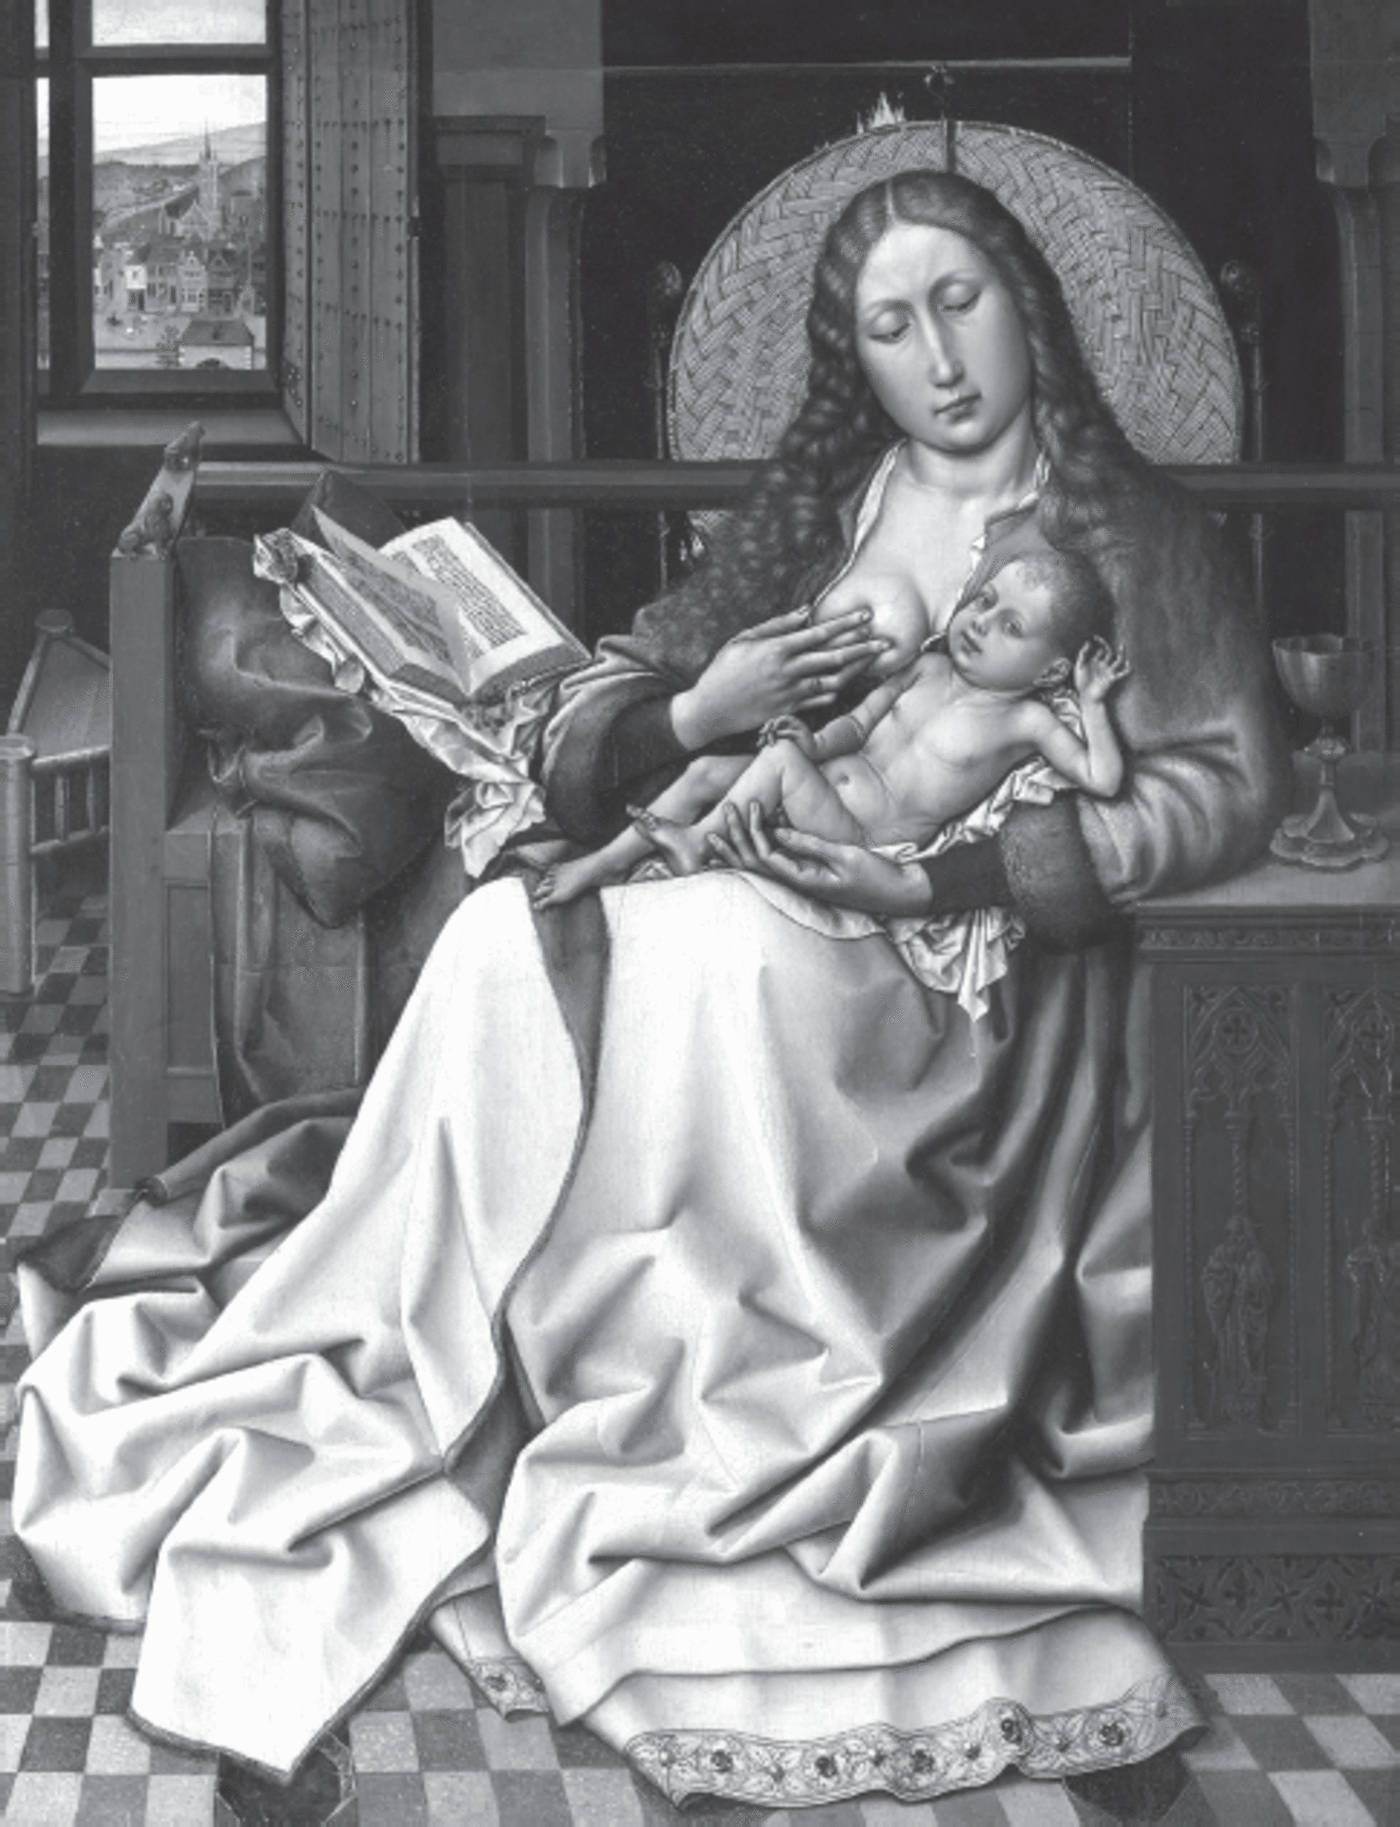 Squeezing, Squirting, Spilling Milk The Lactation of Saint Bernard and the Flemish Madonna Lactans